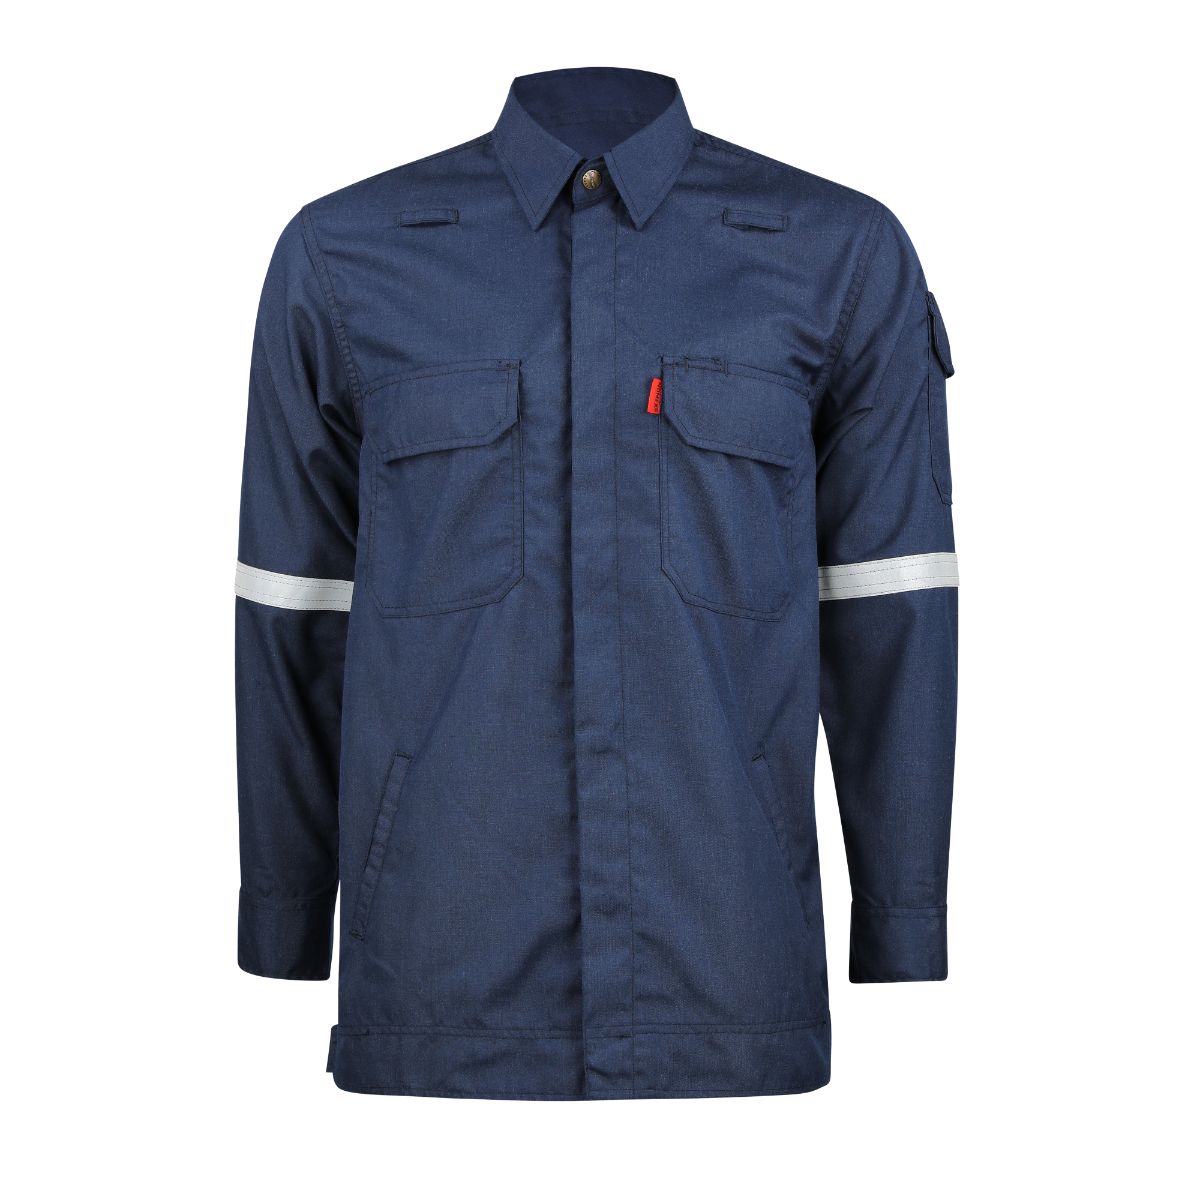 PROBAN FLAME RESISTANT WORK JACKET BY ALSICO CHOICE OF SIZE AND COLOUR 